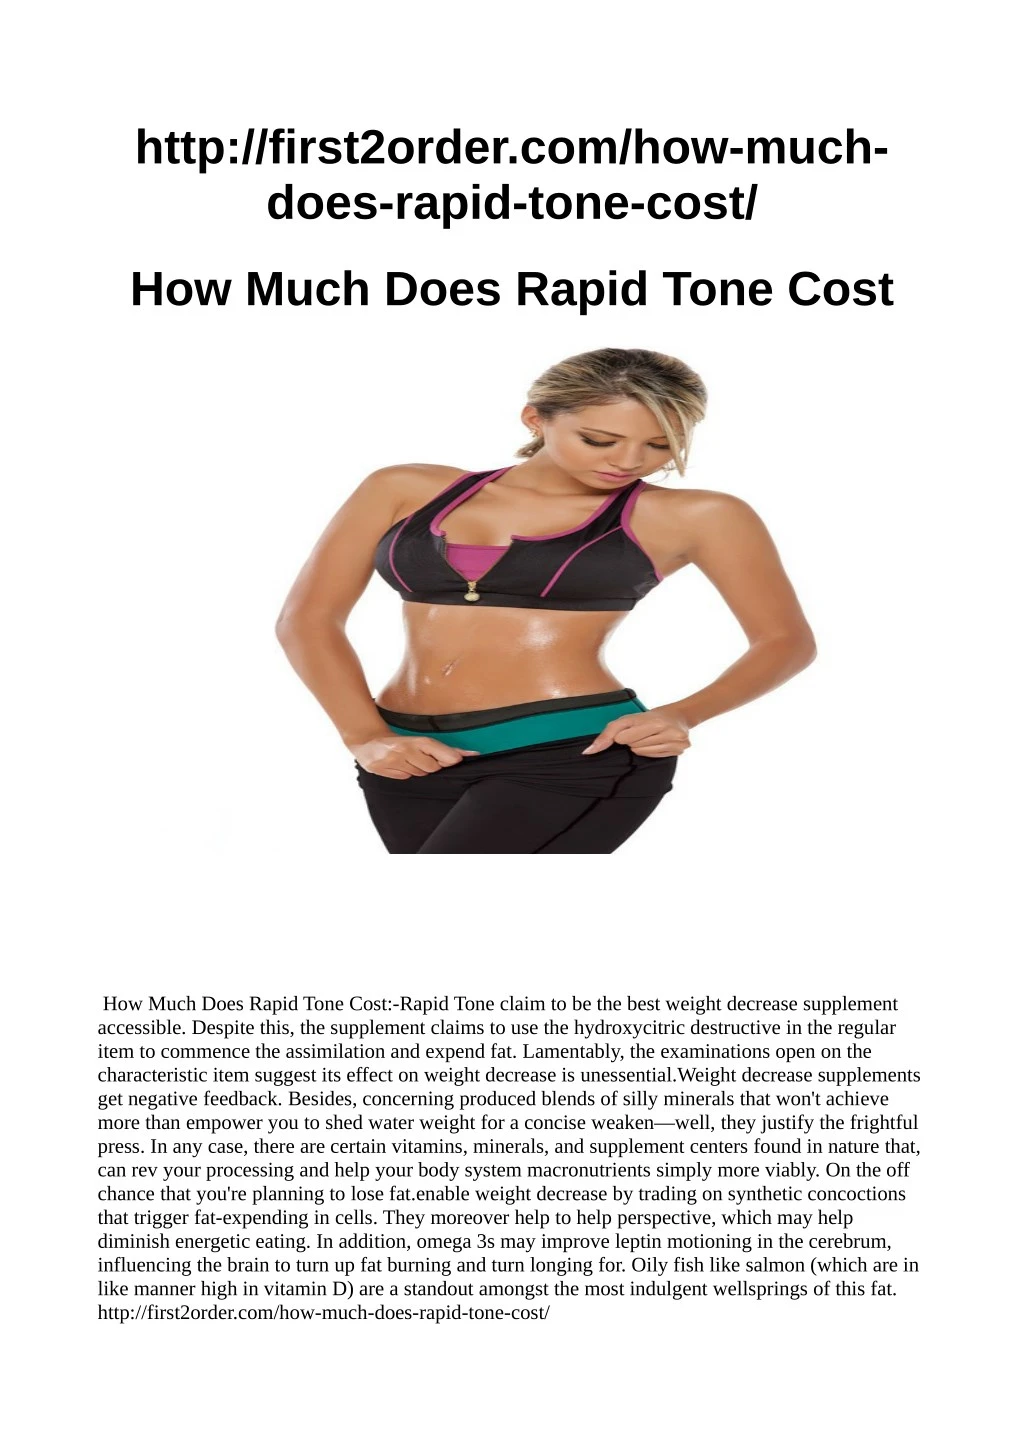 http first2order com how much does rapid tone cost